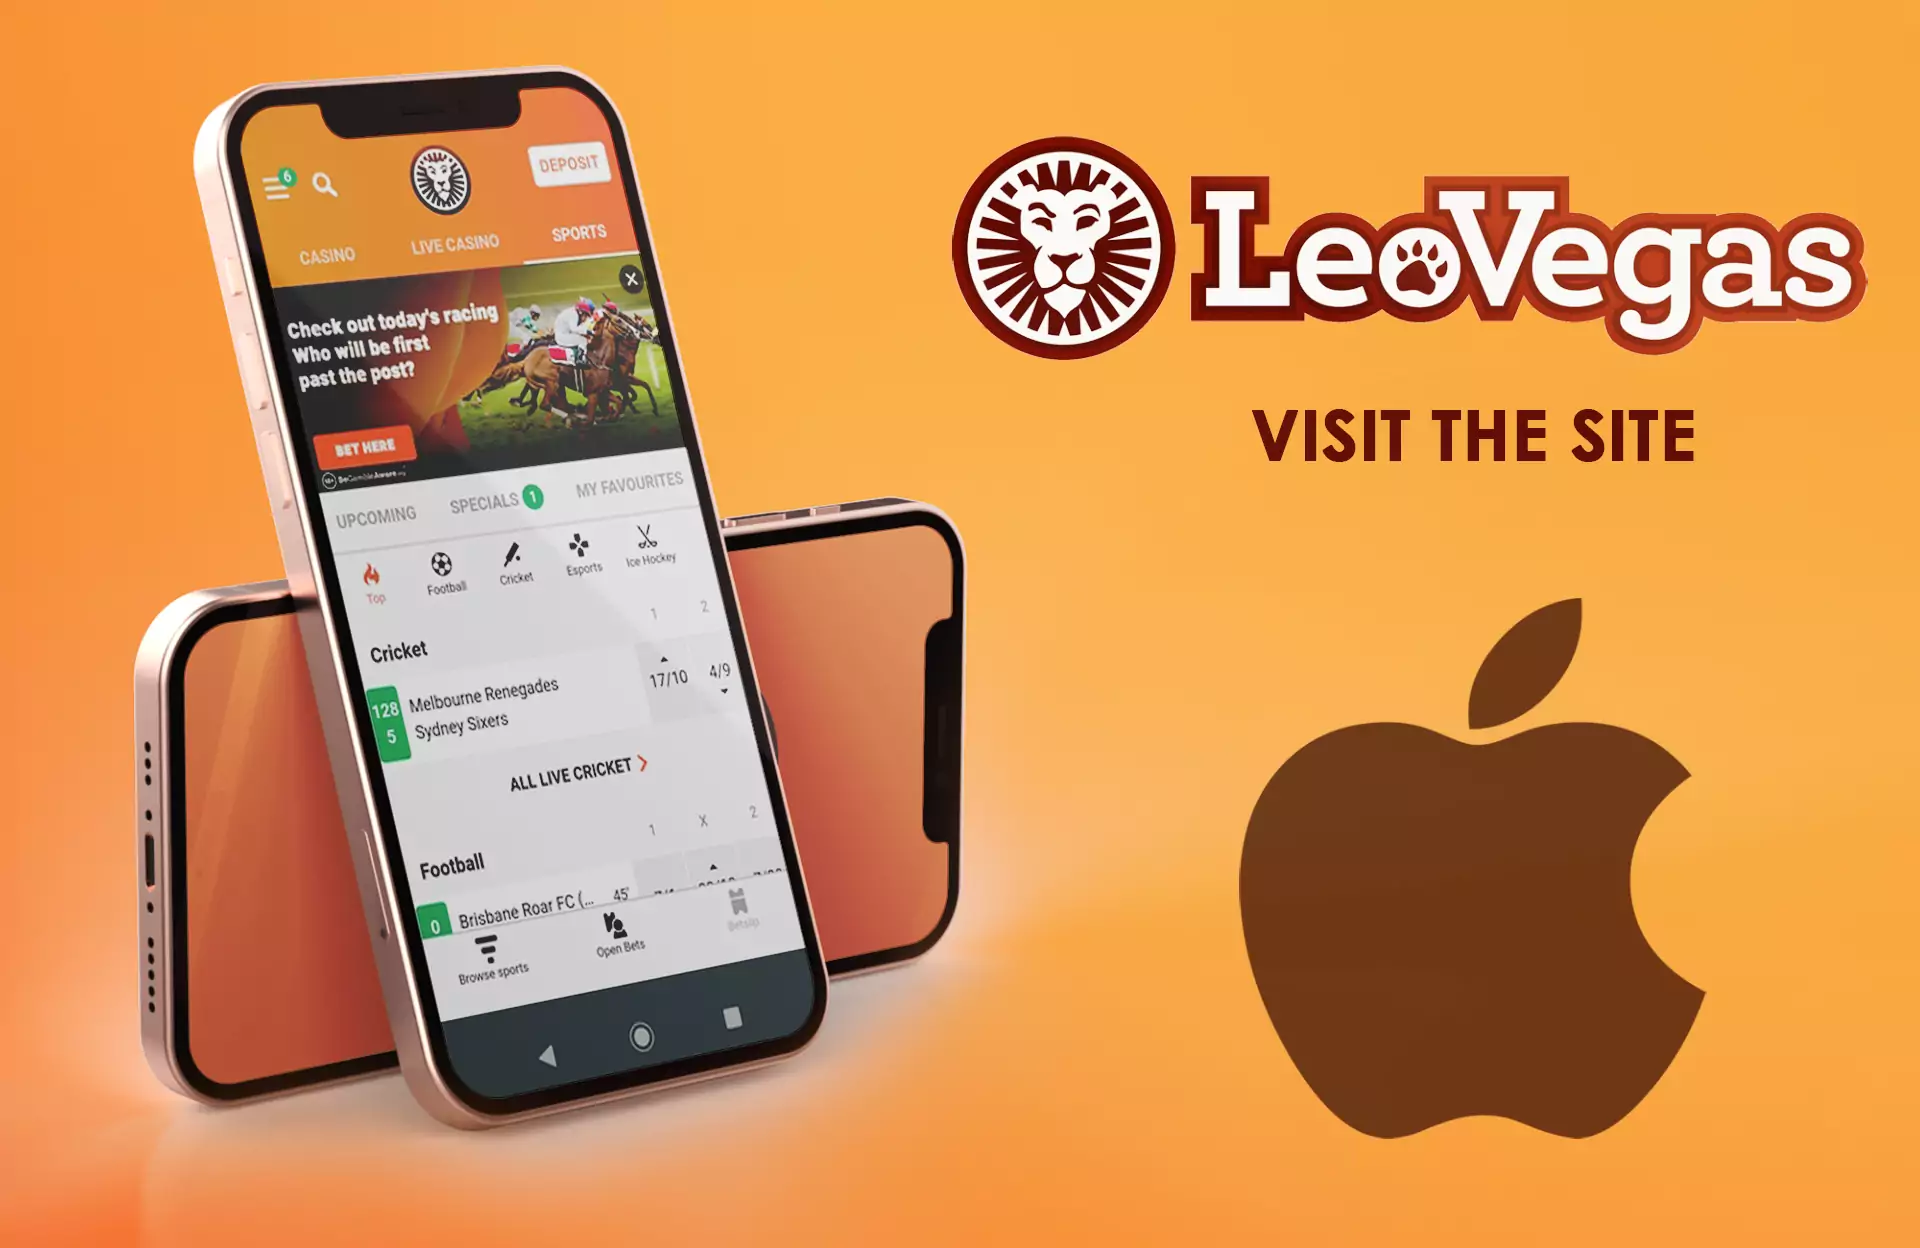 Open the homepage of LeoVegas in your mobile browser.